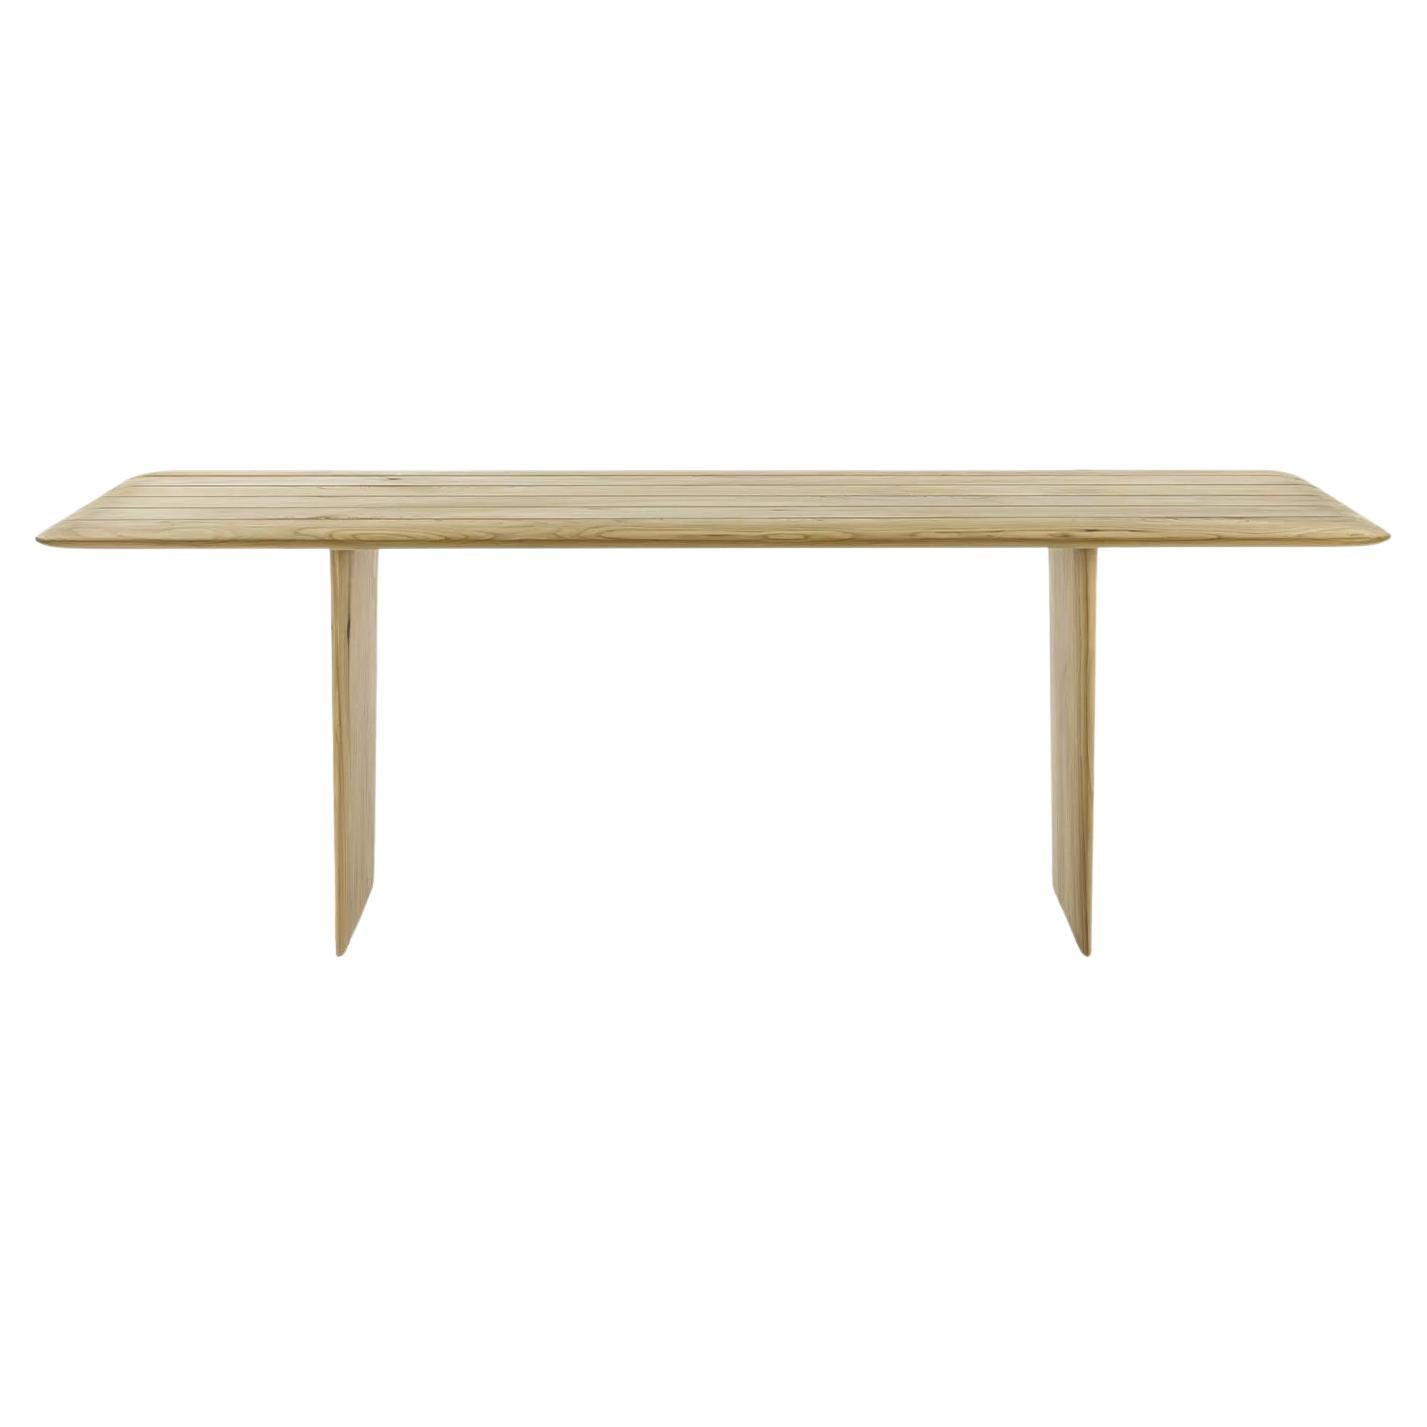 Vela Outdoor Solid Cedar Dining Table, Made in Italy  For Sale